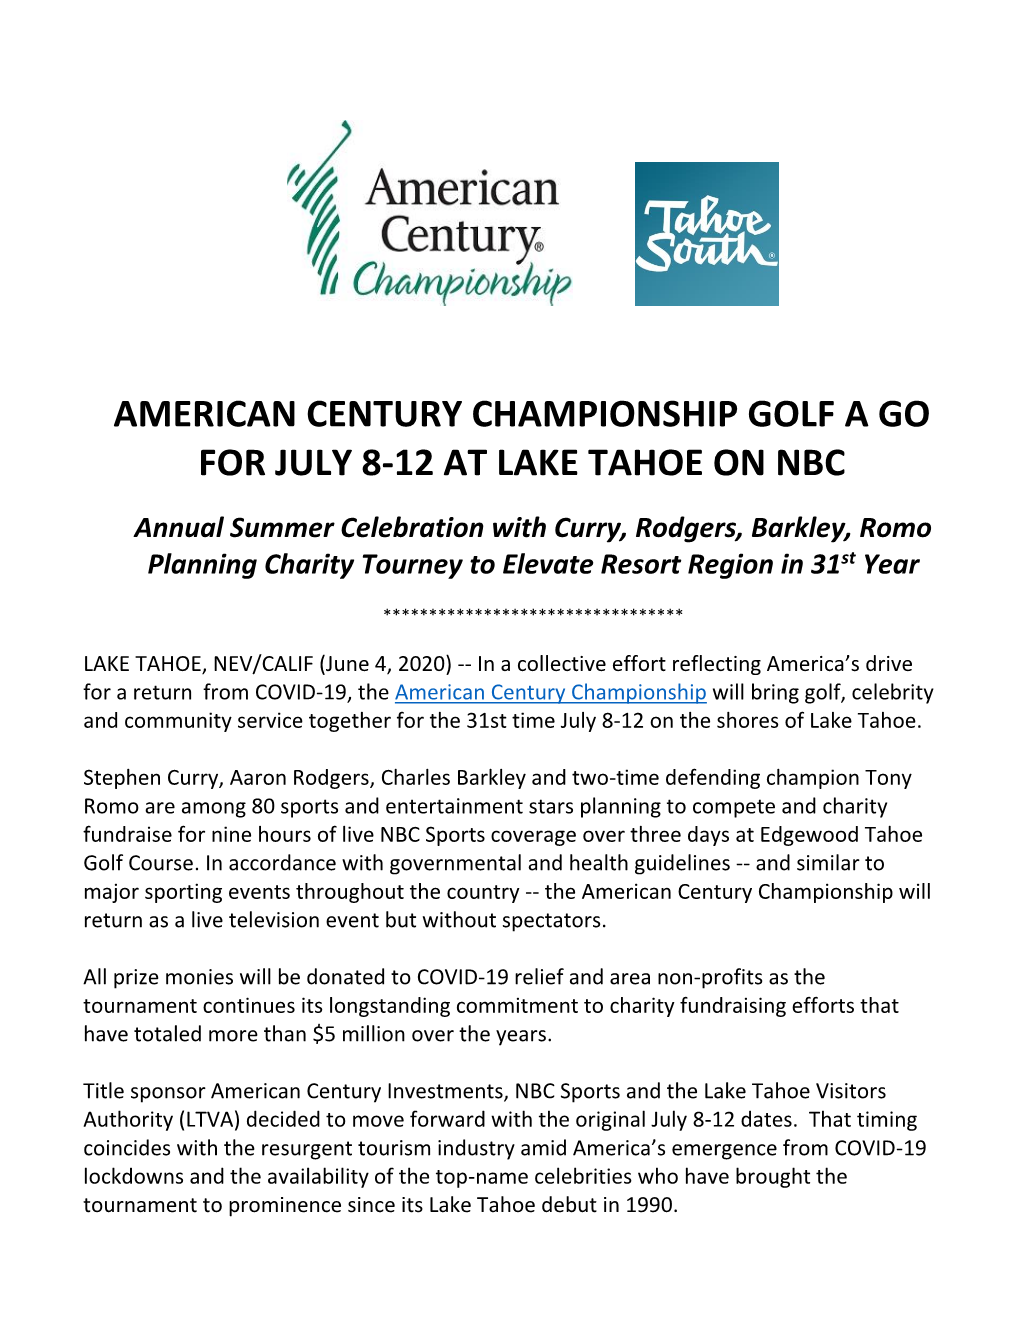 American Century Championship Golf a Go for July 8-12 at Lake Tahoe on Nbc